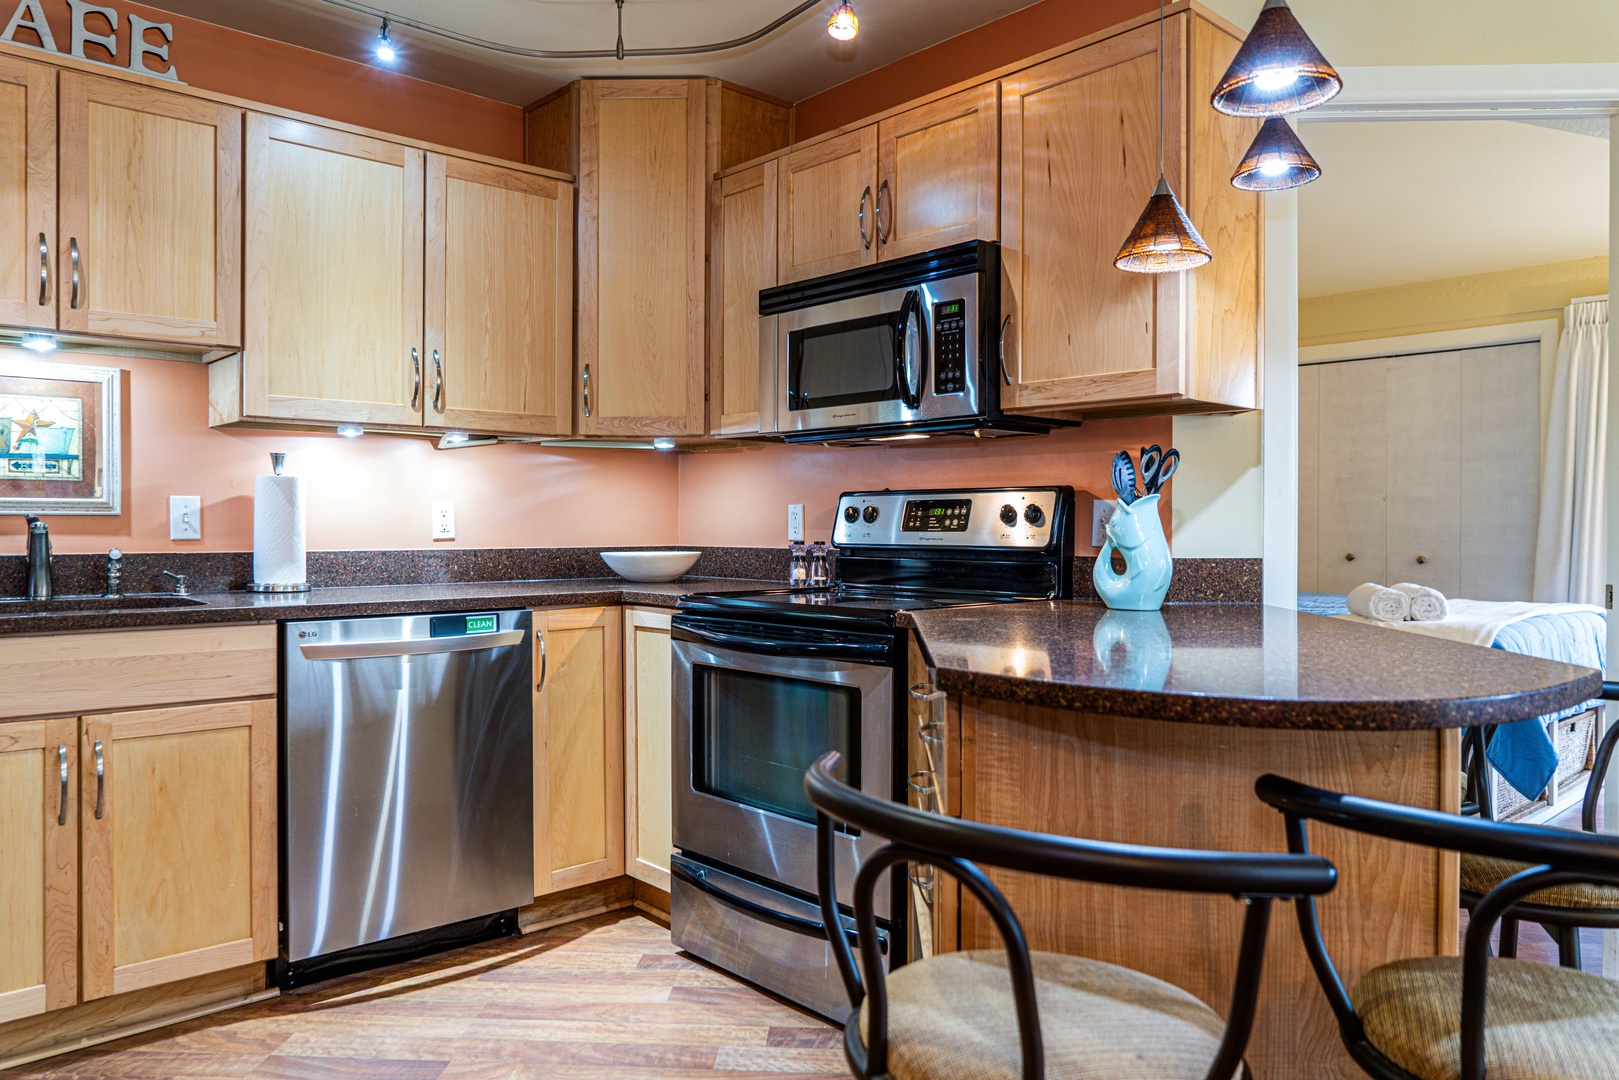 The open kitchen is spacious & offers all the comforts of home